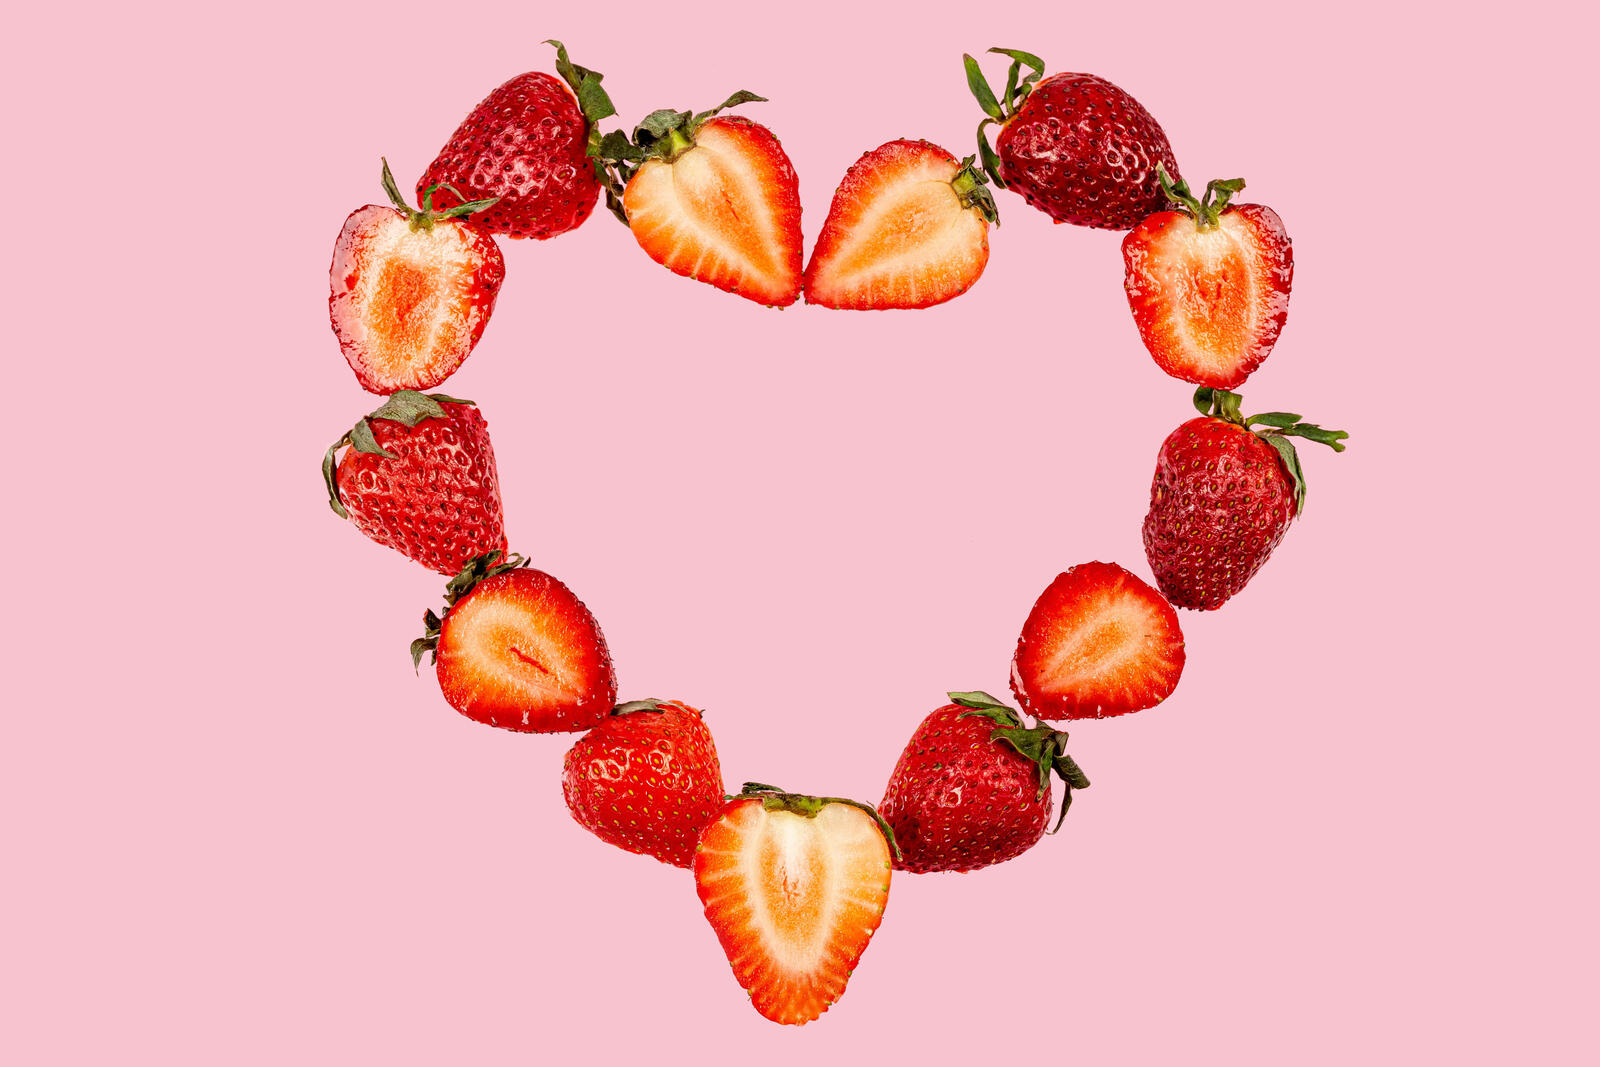 Wallpapers food heart strawberry on the desktop